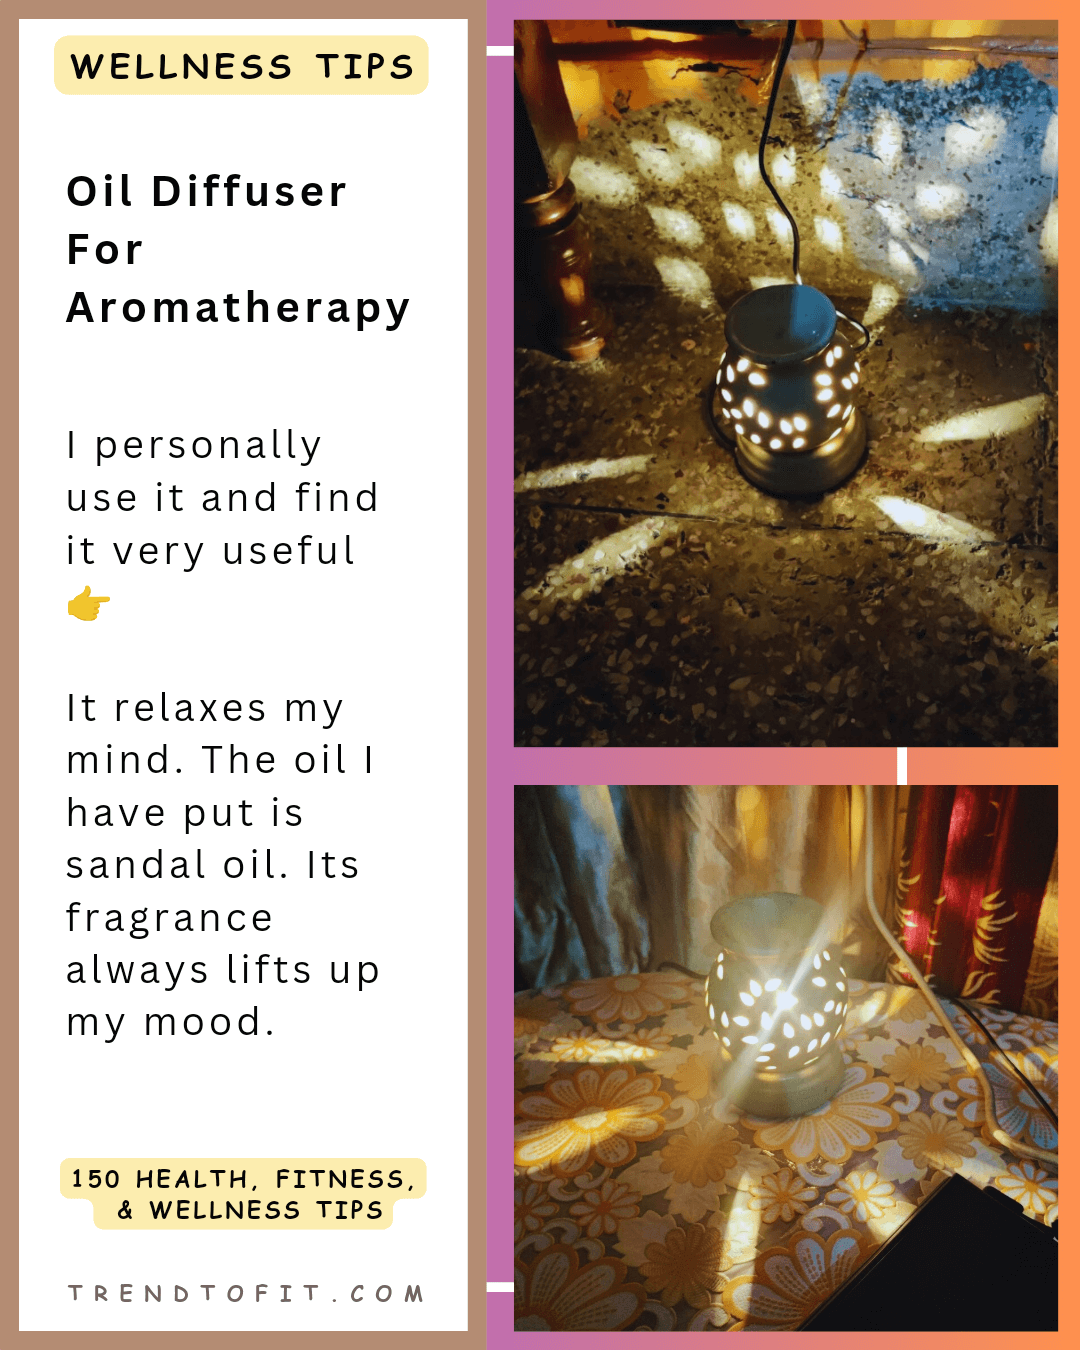 mental health tips: use oil diffuser at home